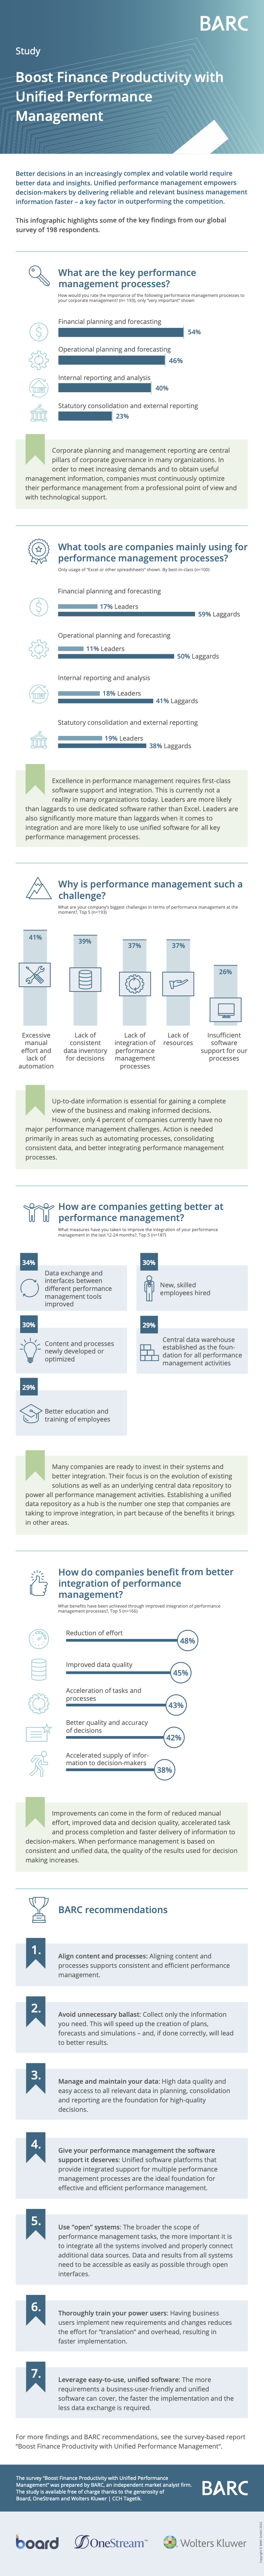 Infographic: Boost Finance Productivity with Unified Performance Management